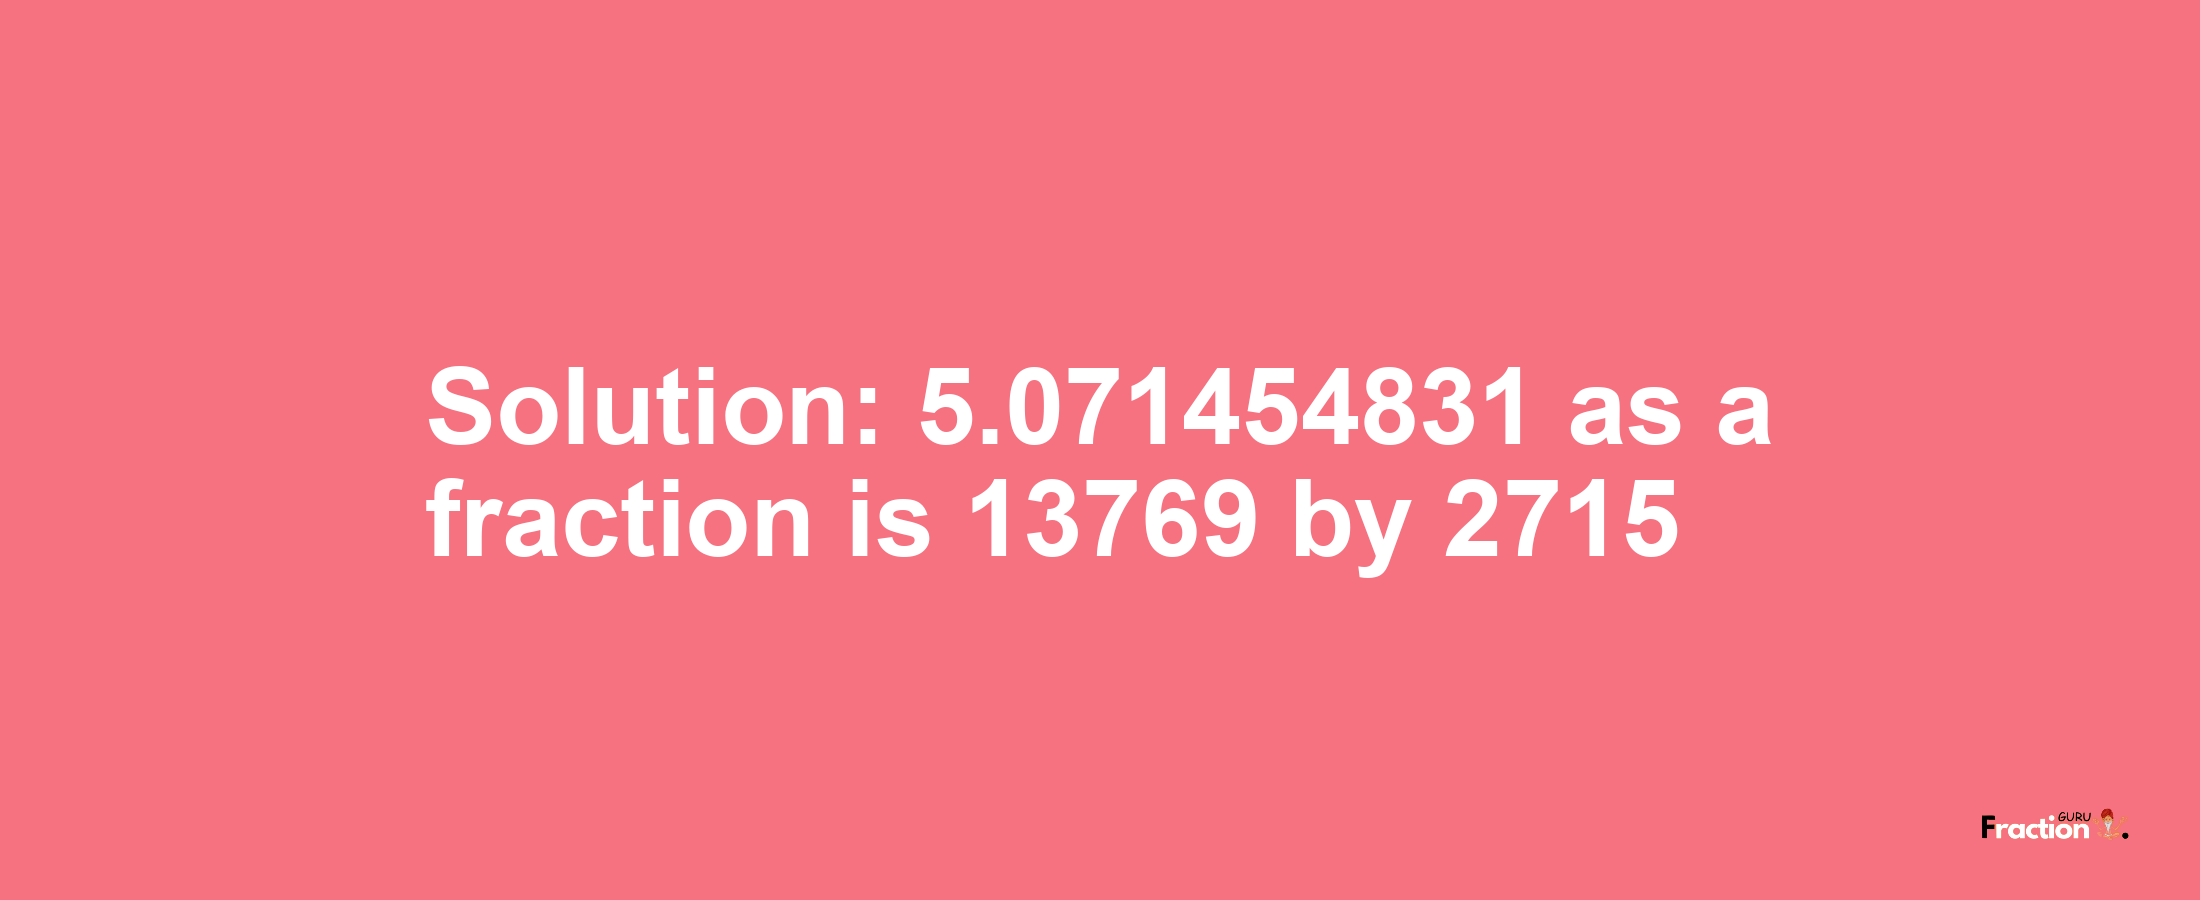 Solution:5.071454831 as a fraction is 13769/2715